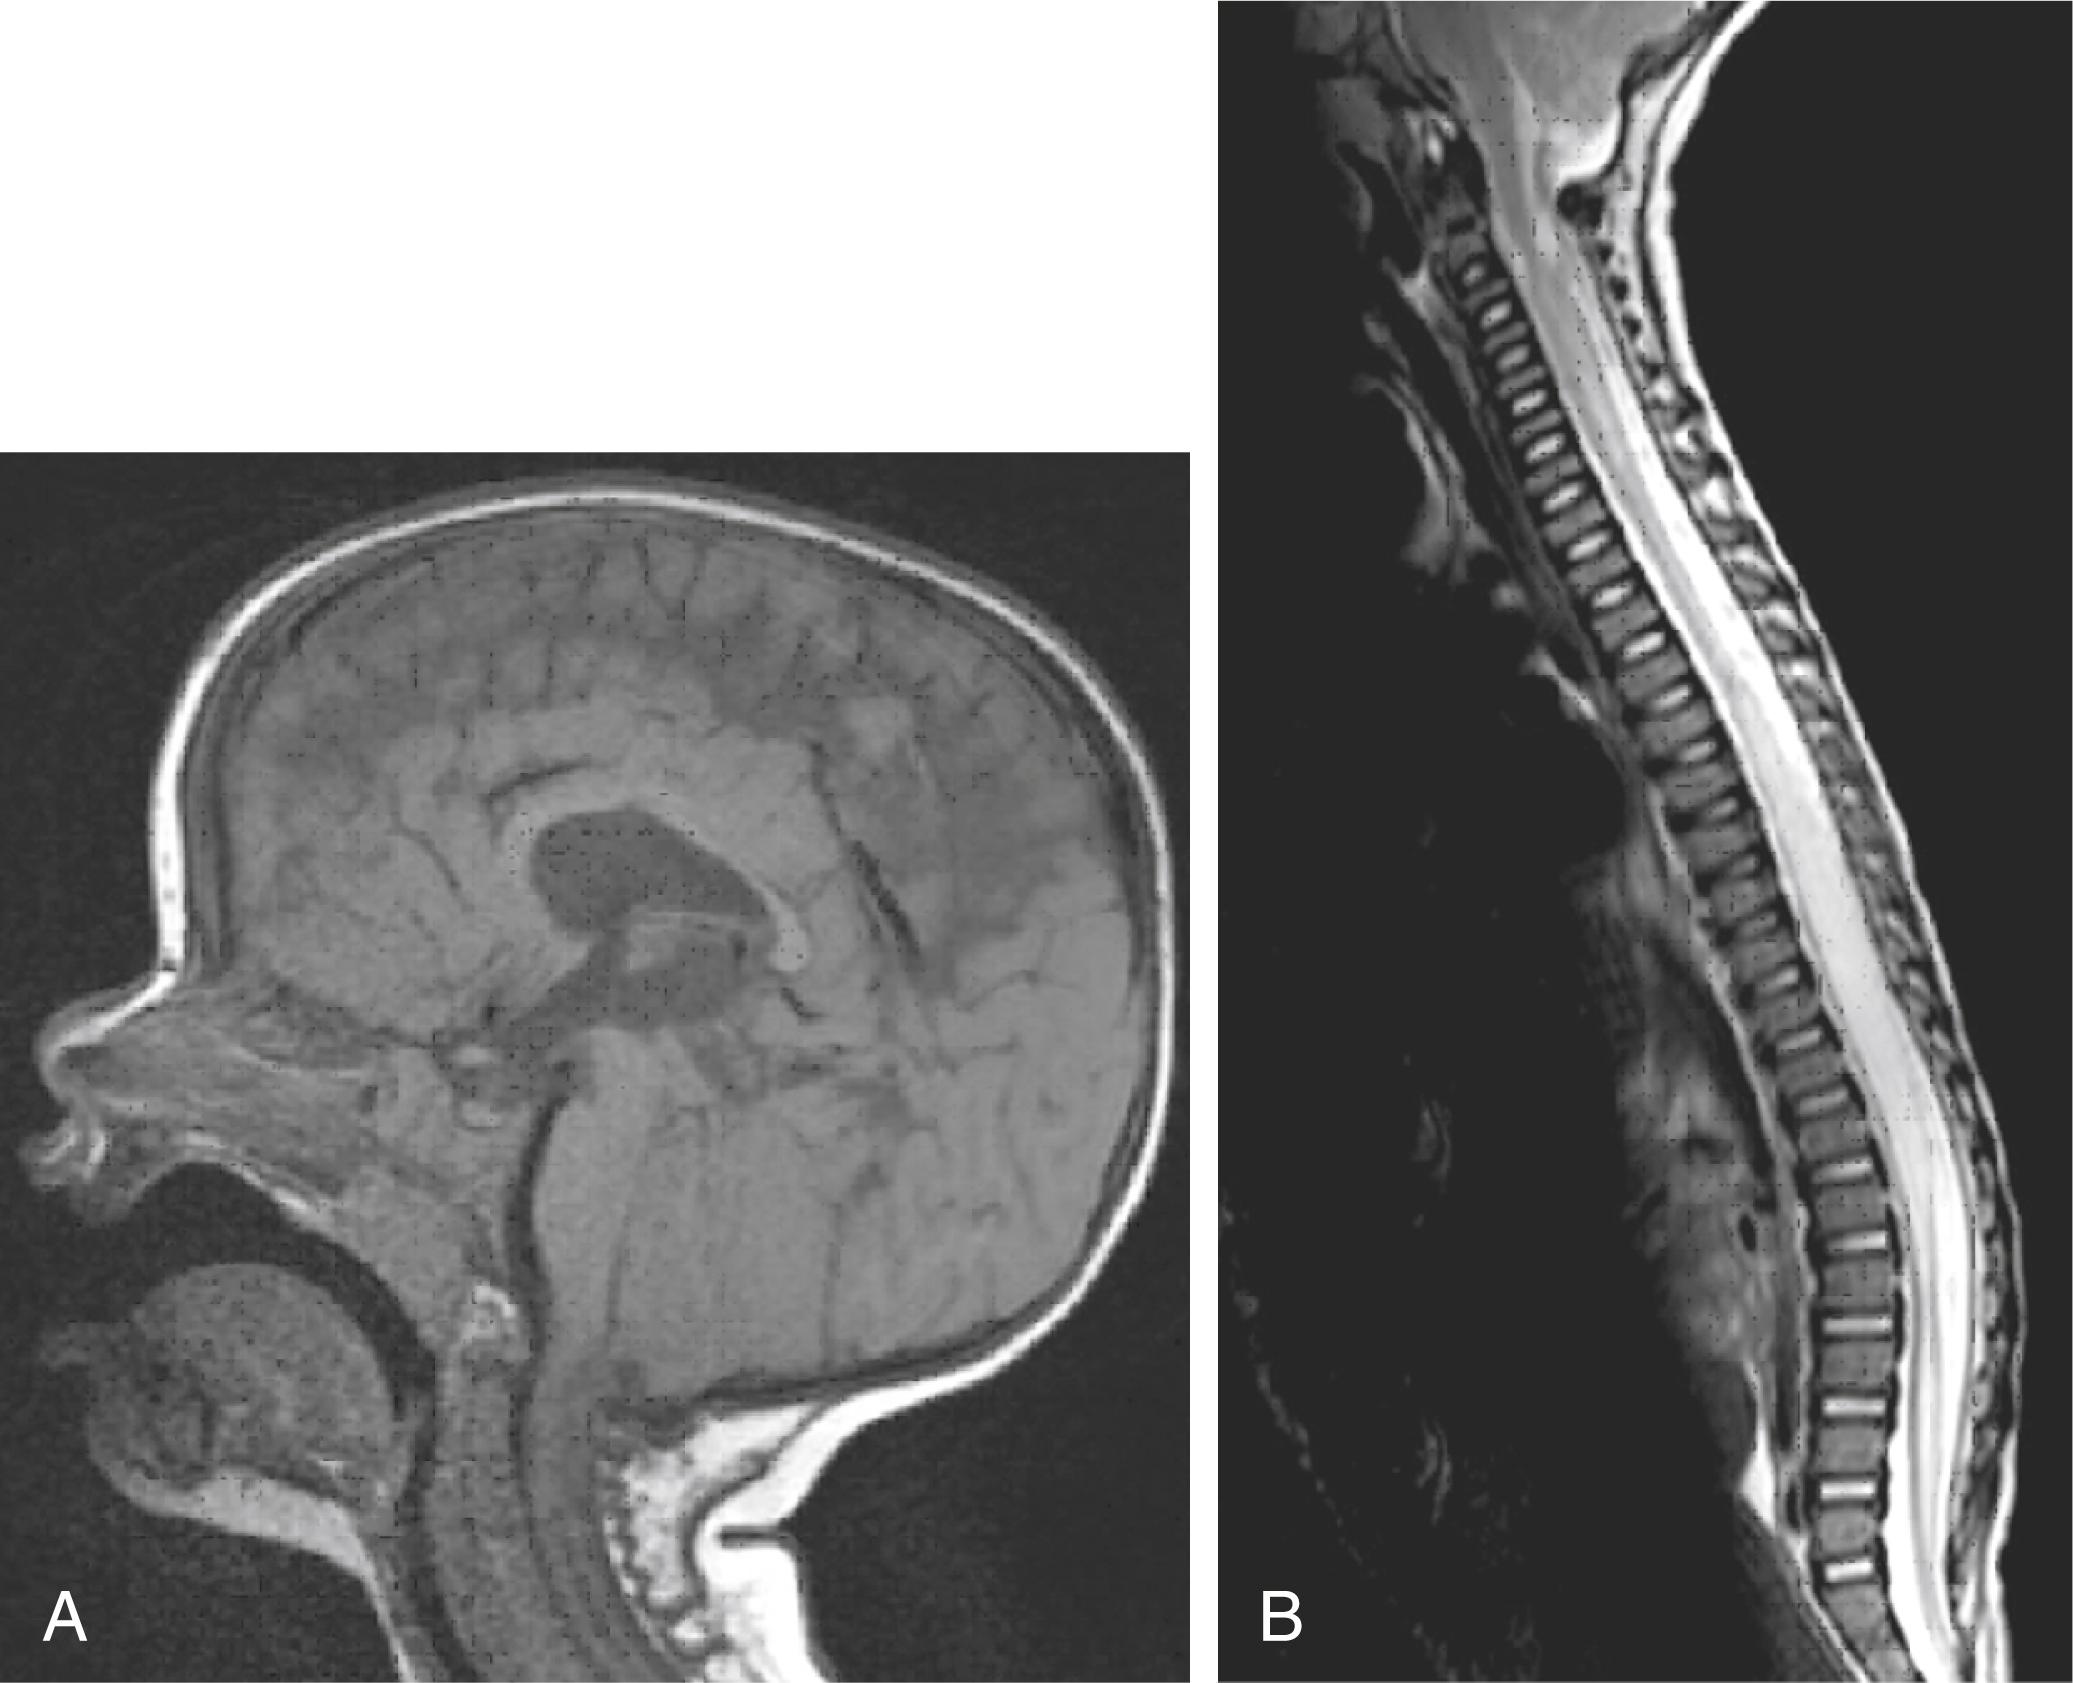 Fig. 28.2, A, T1-weighted sagittal magnetic resonance imaging (MRI) of an 18-month-old boy with Chiari II malformation, recurrent aspiration, and dysphagia, demonstrating typical features of Chiari II with elongated brain stem and cerebellar tonsils in the upper cervical region. B, T2-weighted sagittal spine MRI of the same patient demonstrating large spinal cord syrinx and low-lying cord secondary to myelomeningocele.